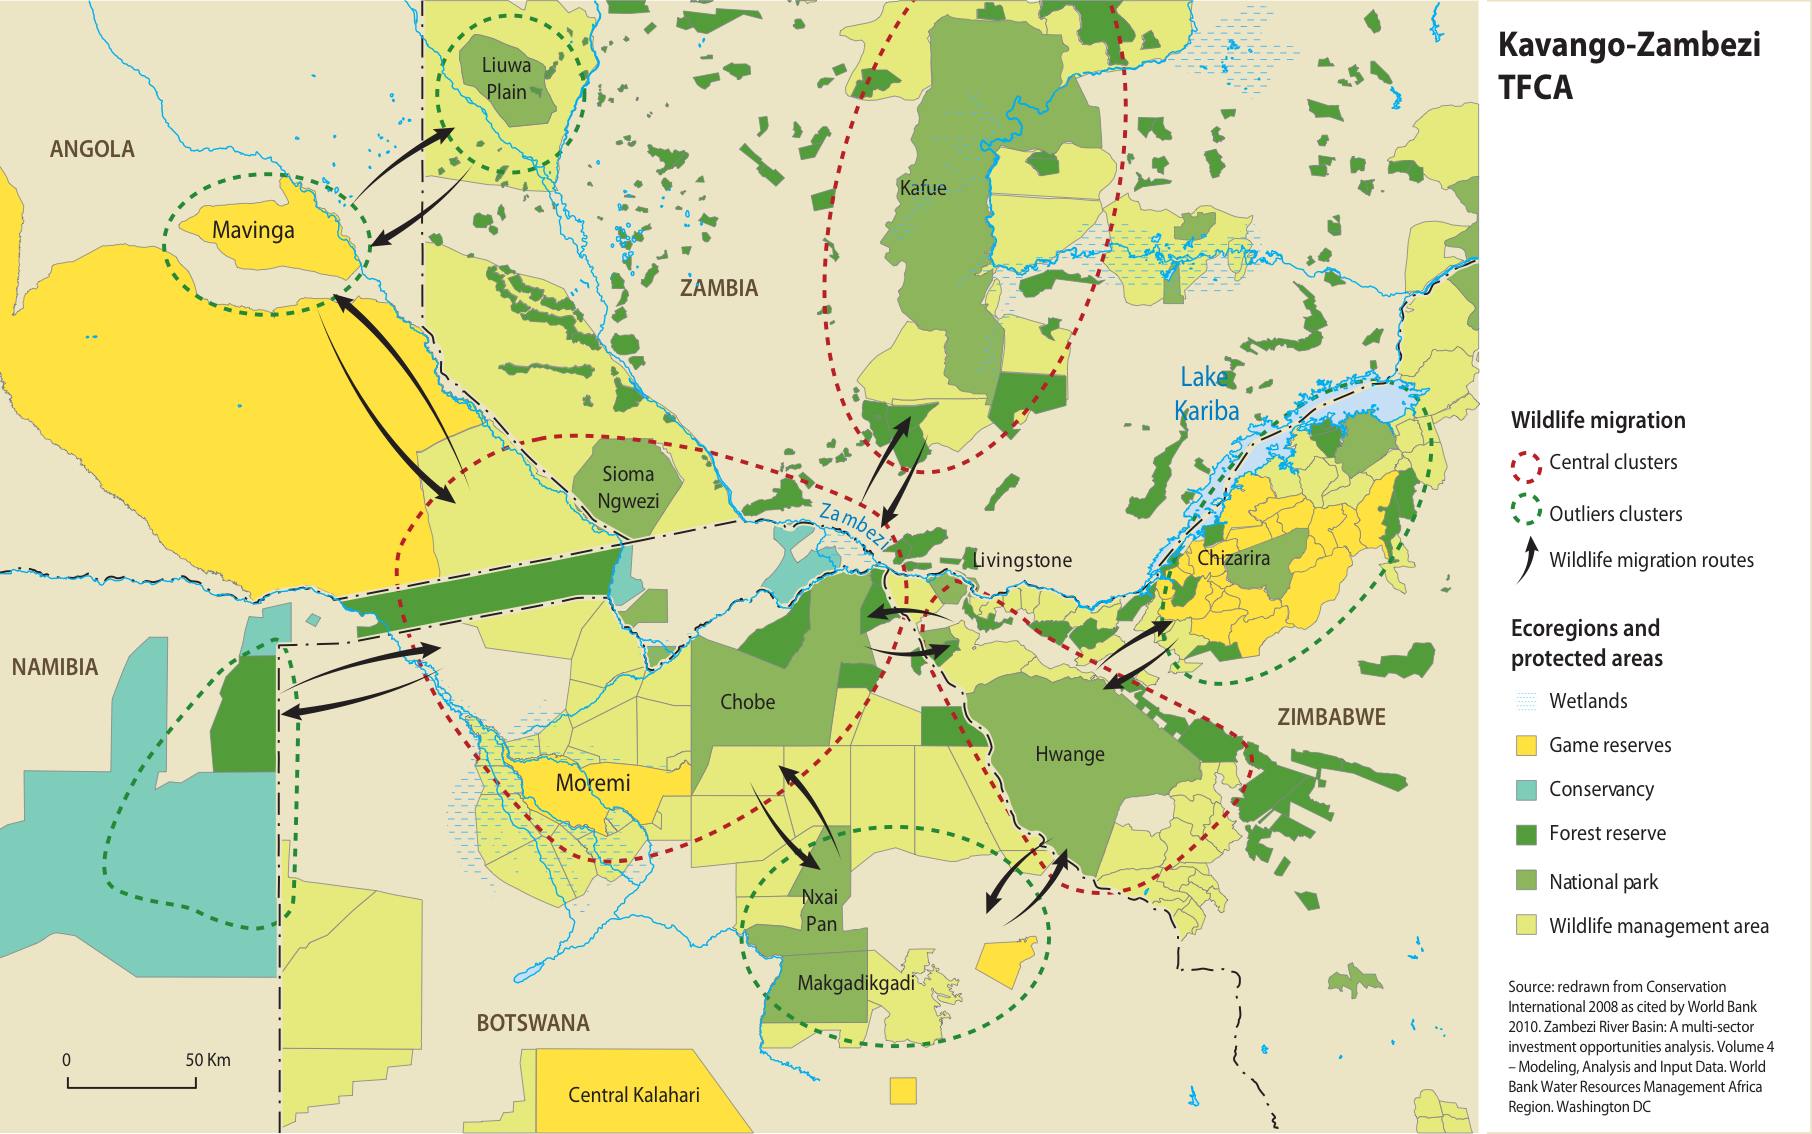 Wildlife migration routes and ecoregions/protected areas in the Kavango-Zambezi Transfrontier Conservation Area